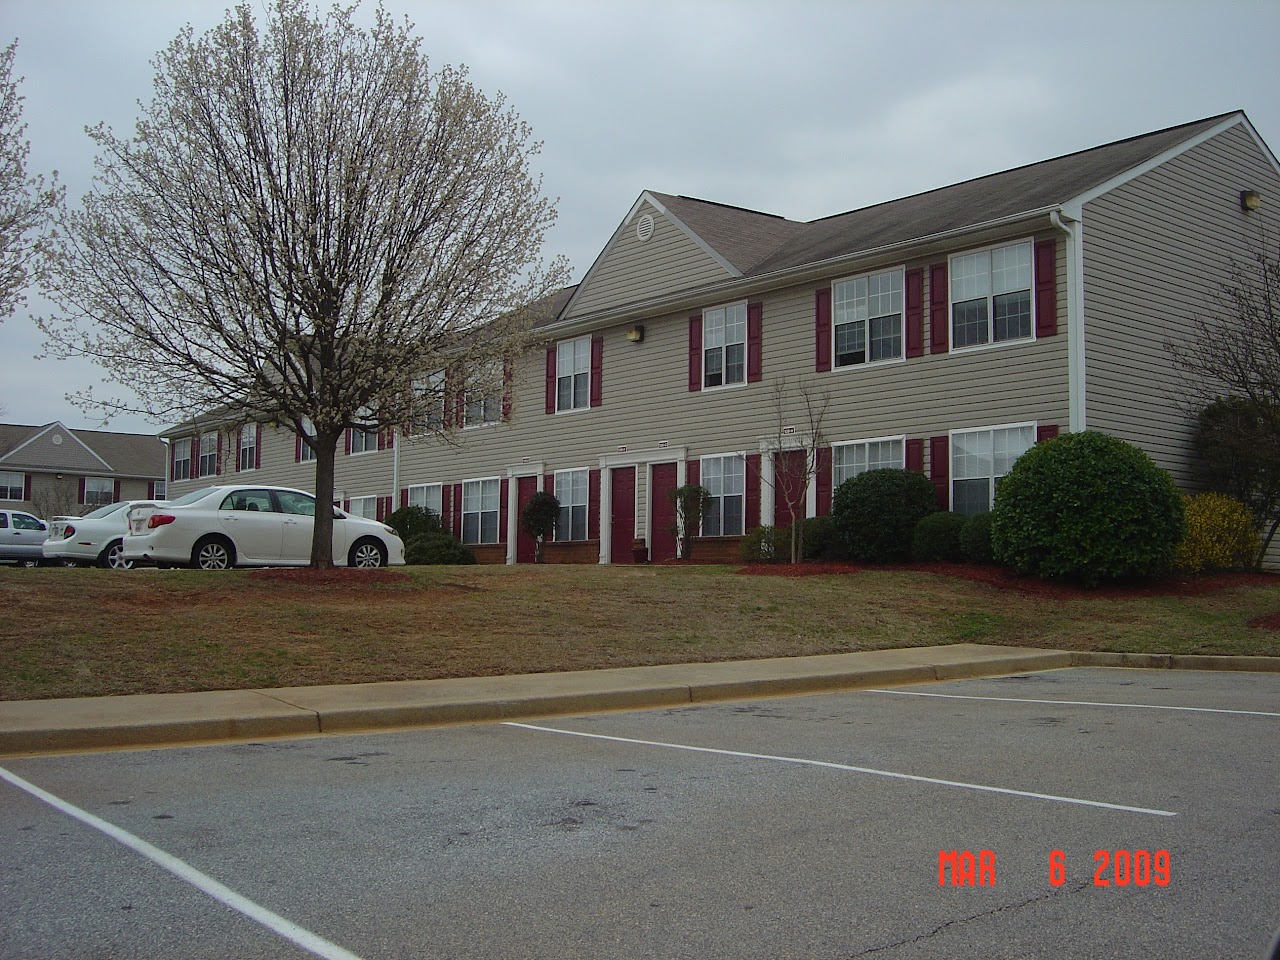 Photo of CREEKSIDE APTS. Affordable housing located at 100 PEBBLE BROOK CT EASLEY, SC 29642